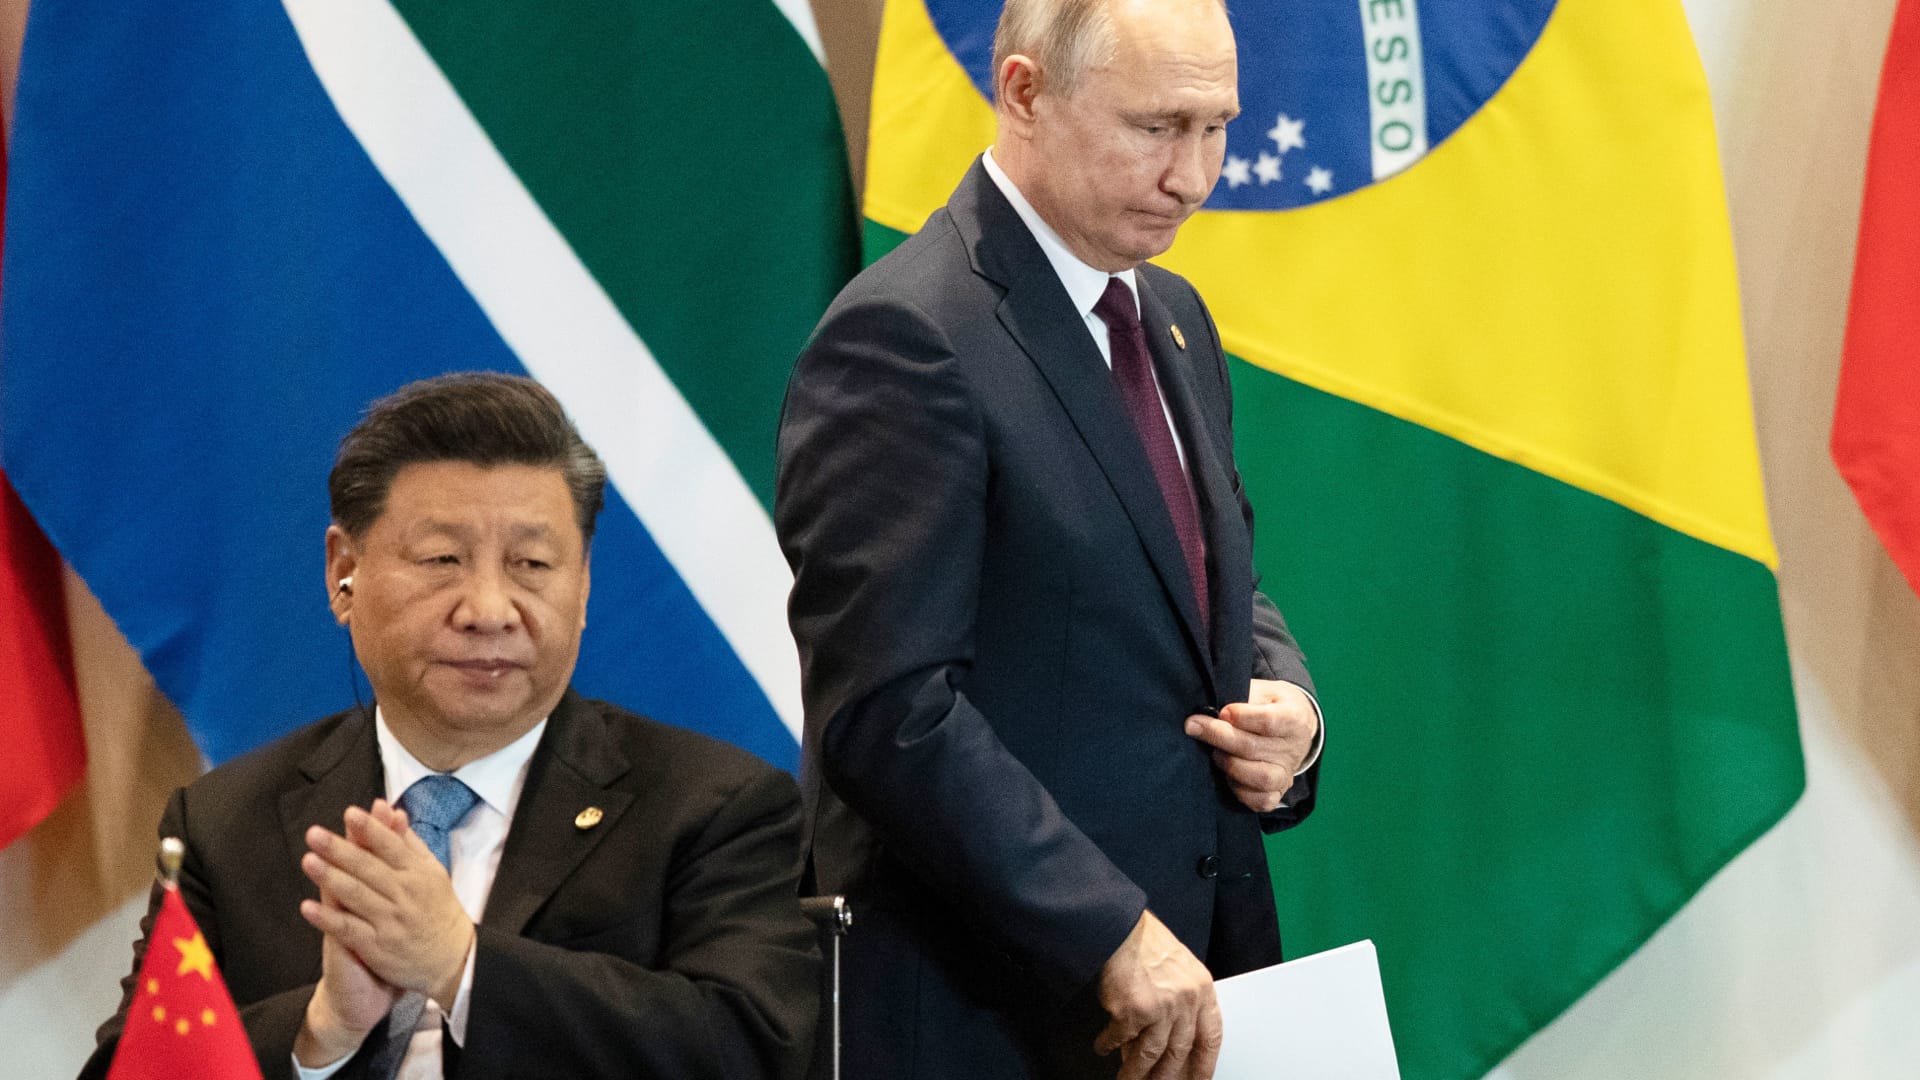 Xi's gamble on Putin may be the most dangerous and short-sighted of his nine years in power